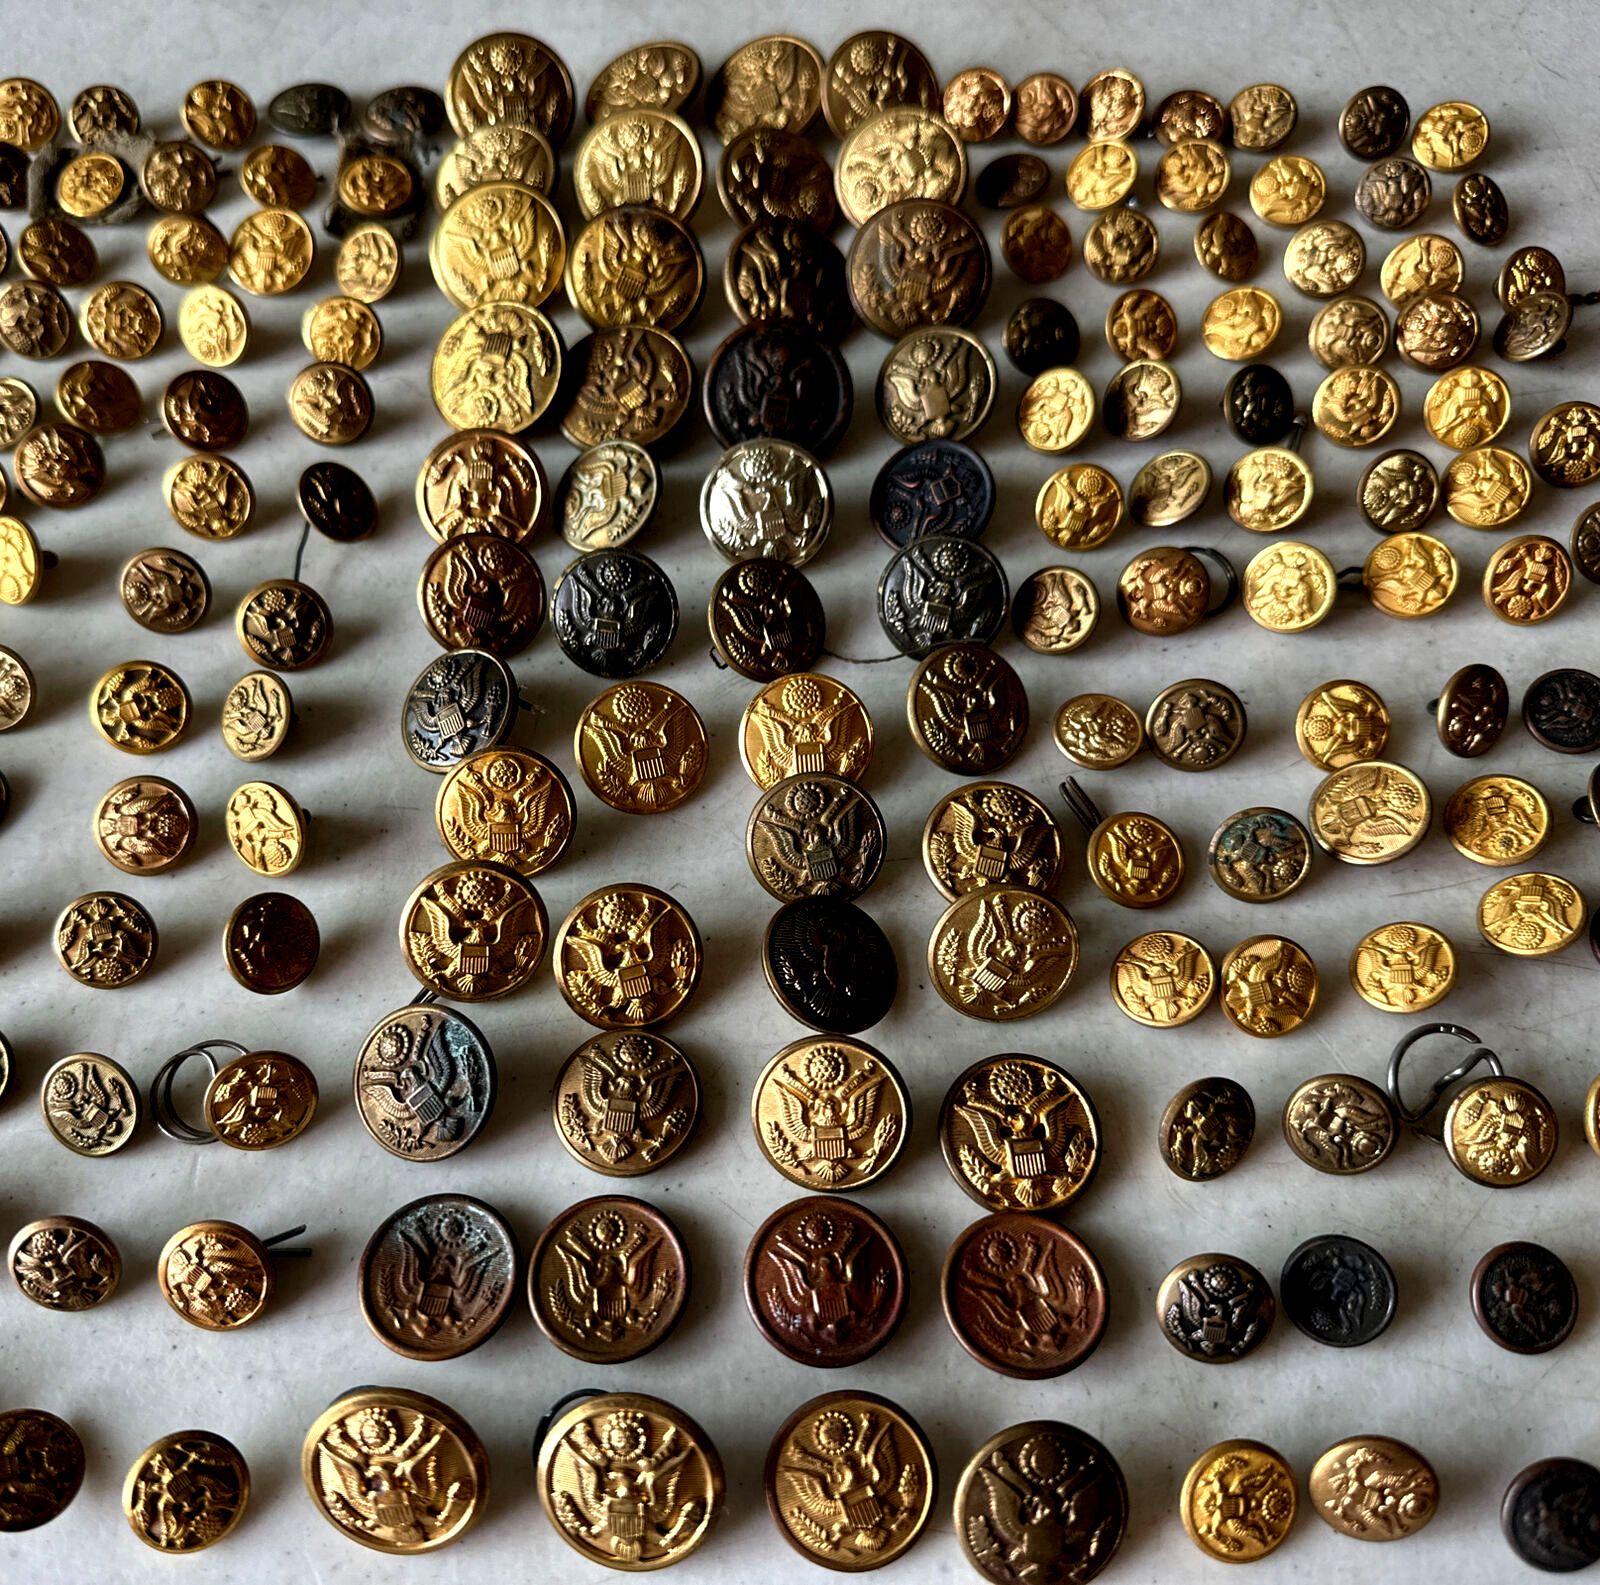 Vintage WW2 US Army Uniform Buttons Huge Collection Lot Of (202) Rares Sets